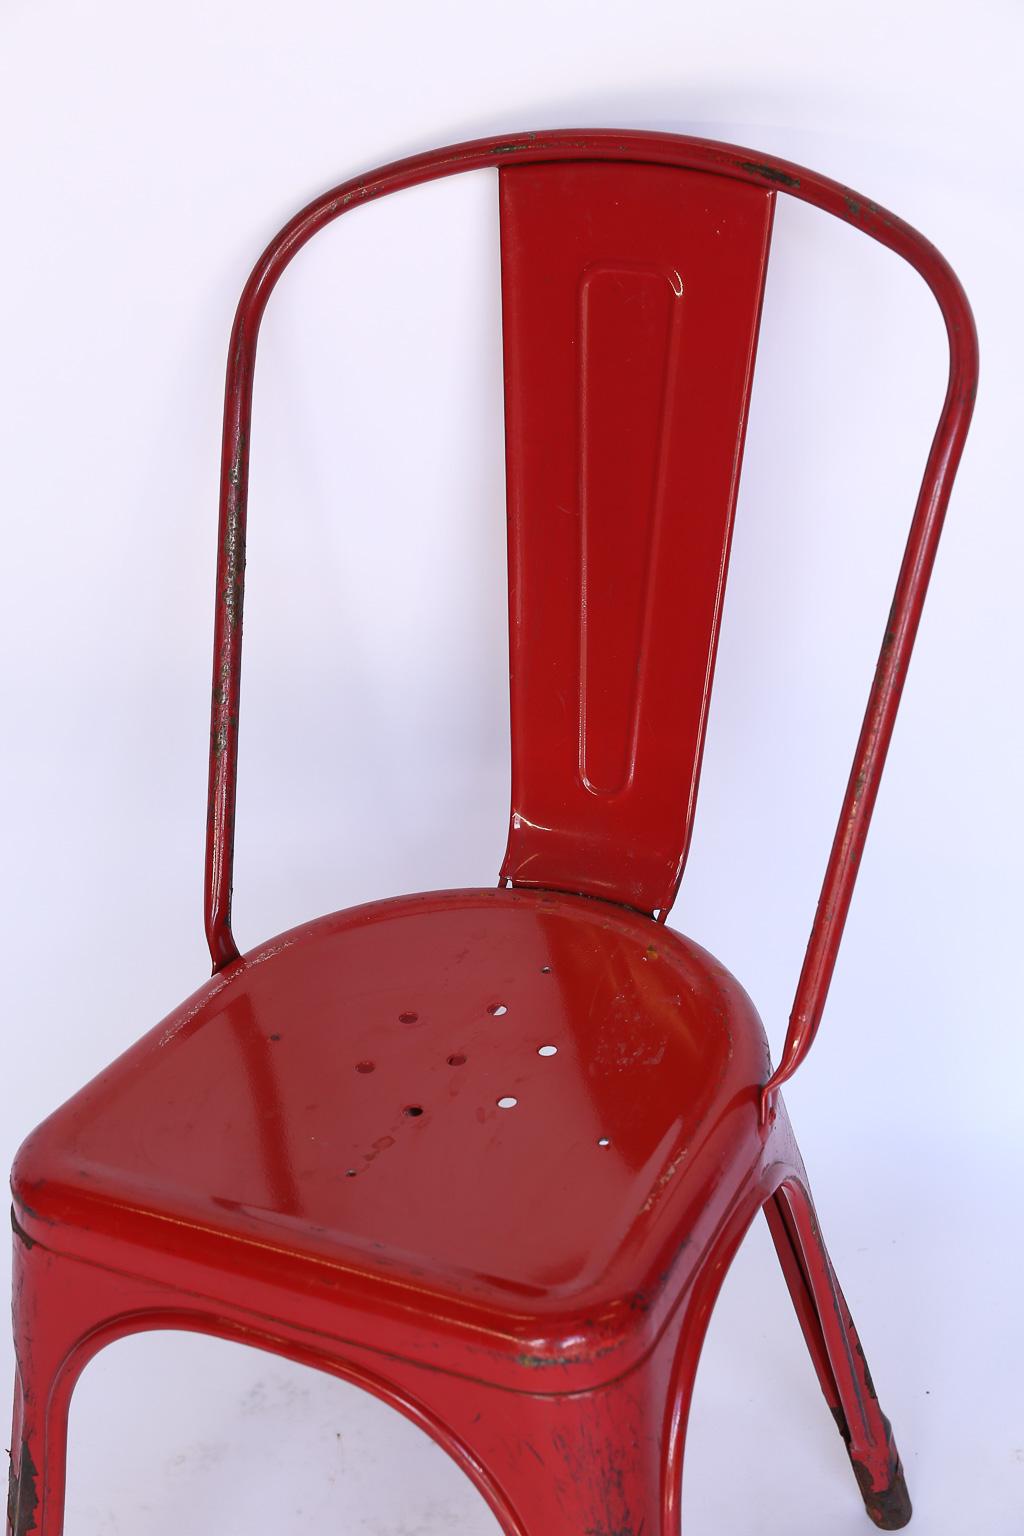 This is a set of six French bistro chairs manufactured by Tolix. The chairs are stackable and light for easy storage. The original red paint is peeling in places and could be stripped to the metal finish or repainted. This is a great set for indoor